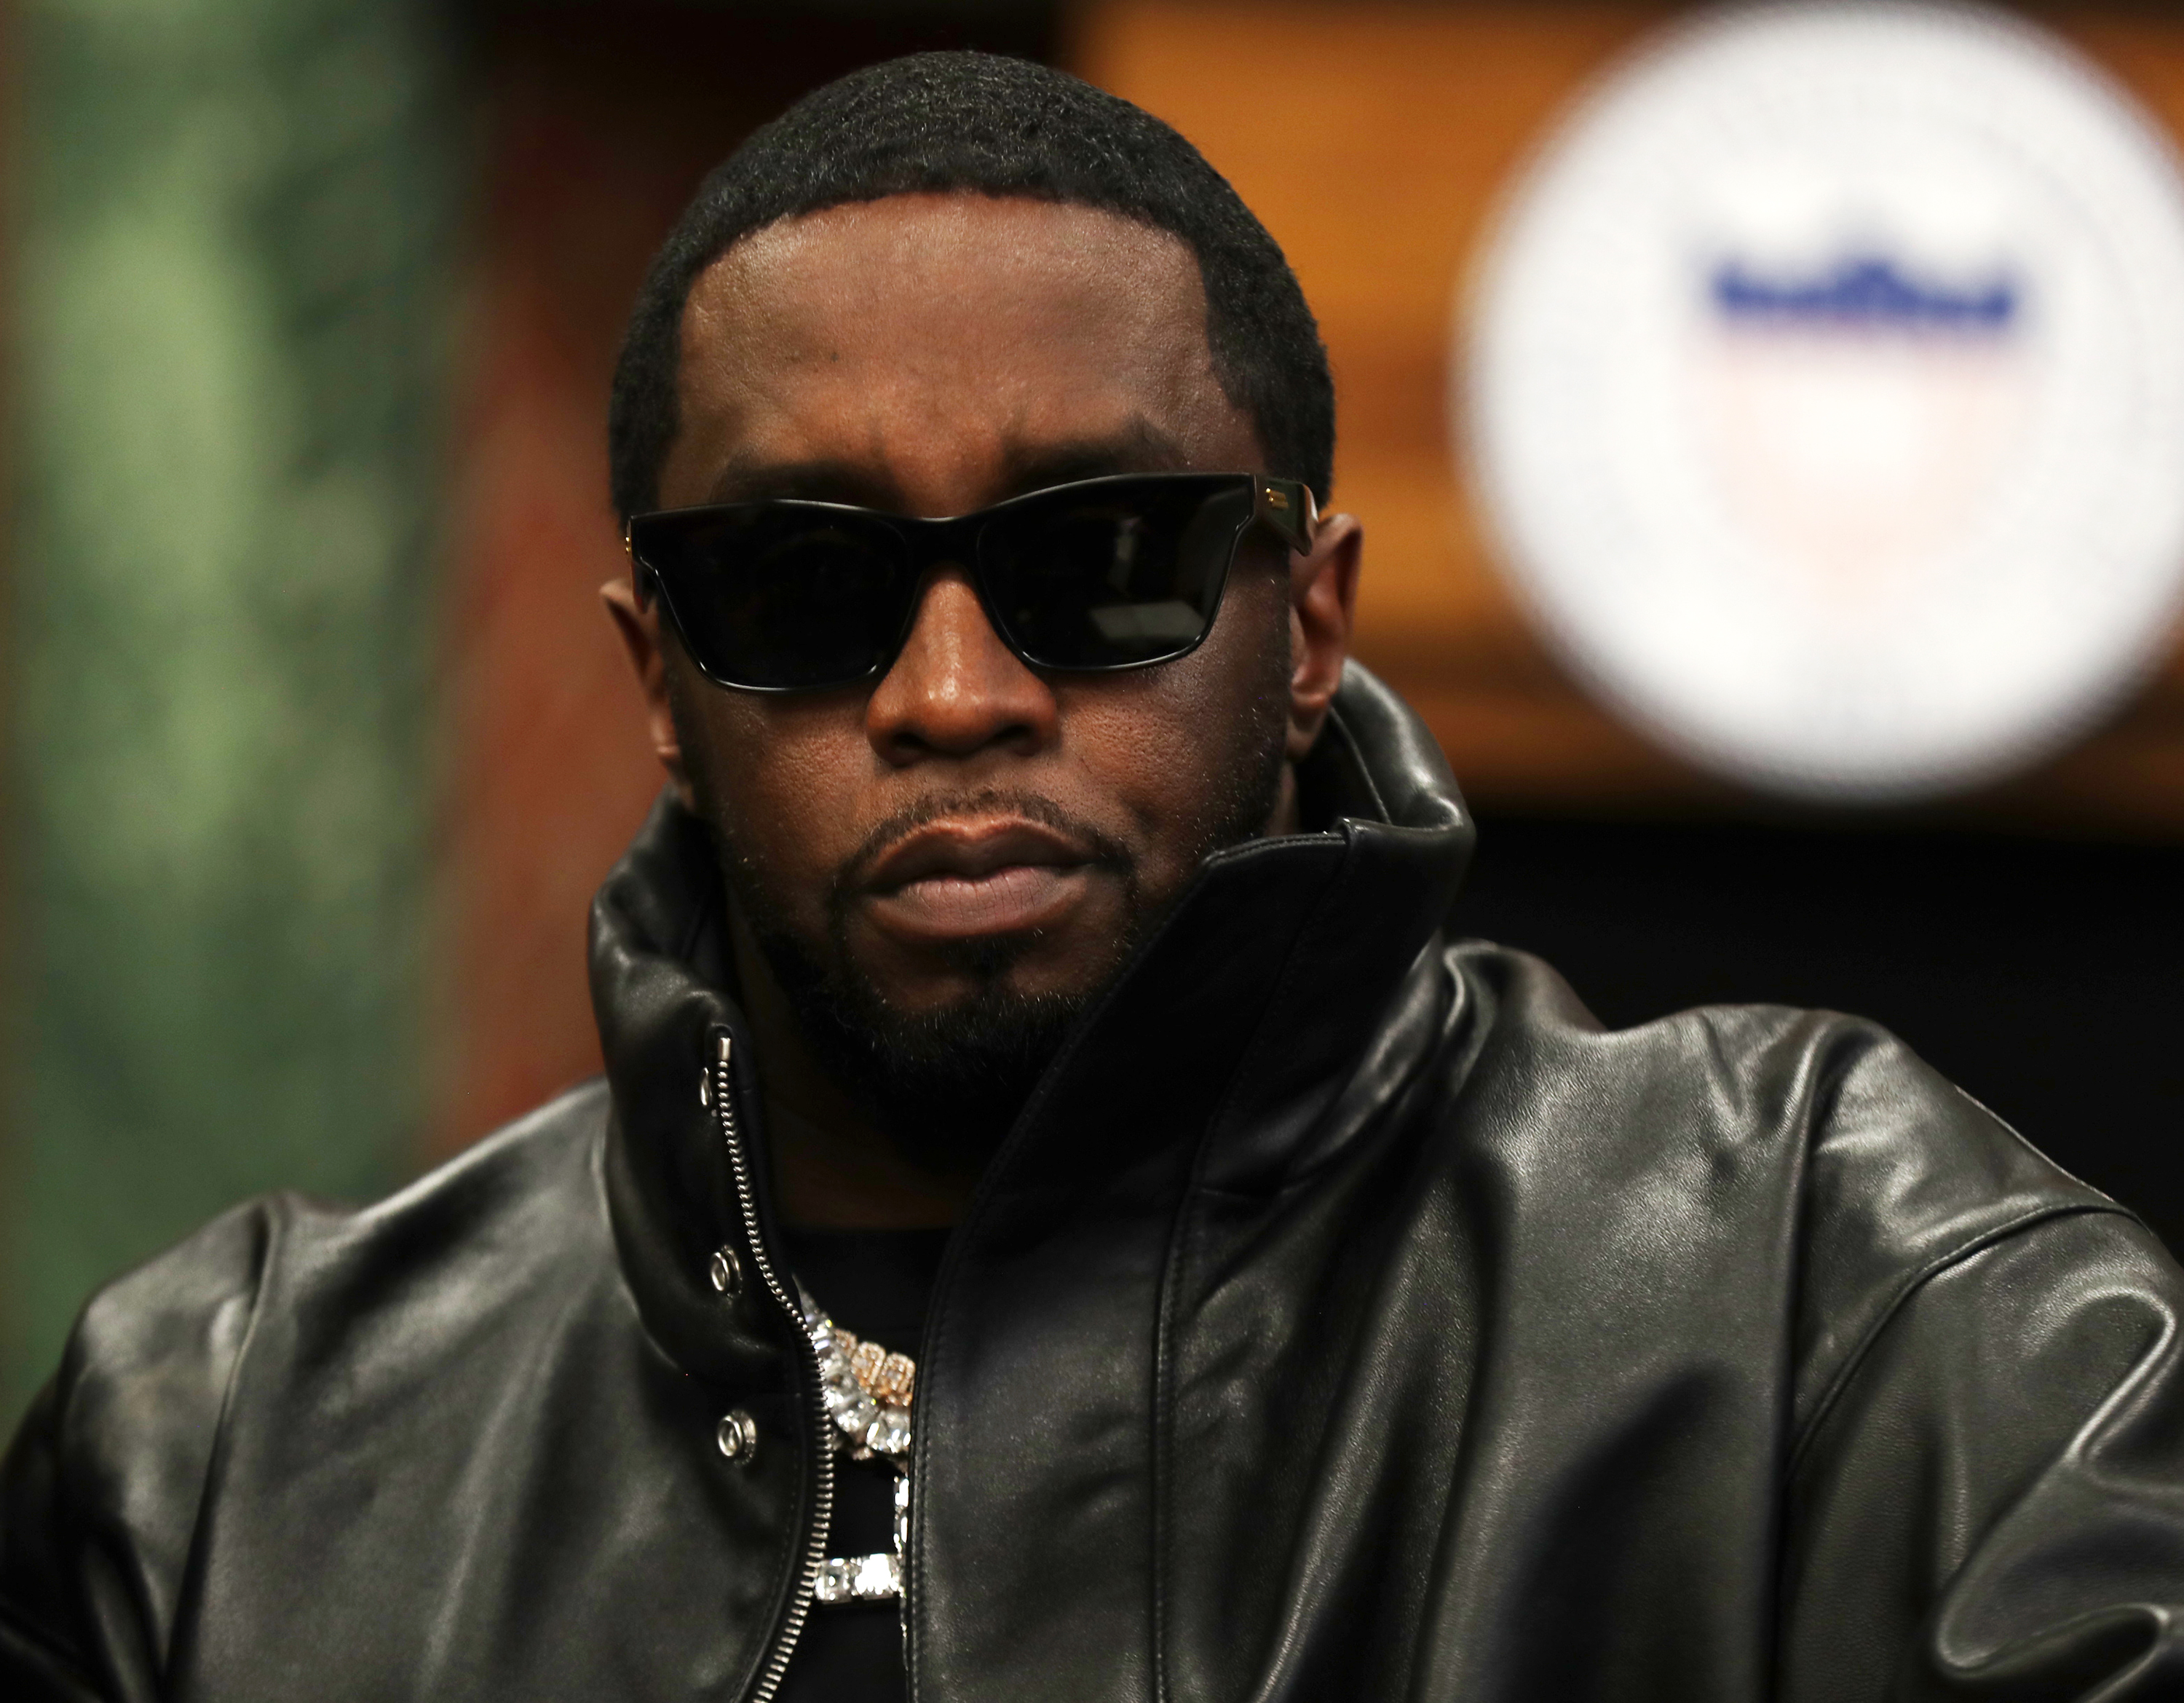 Diddy wearing sunglasses and a high-collar leather jacket.